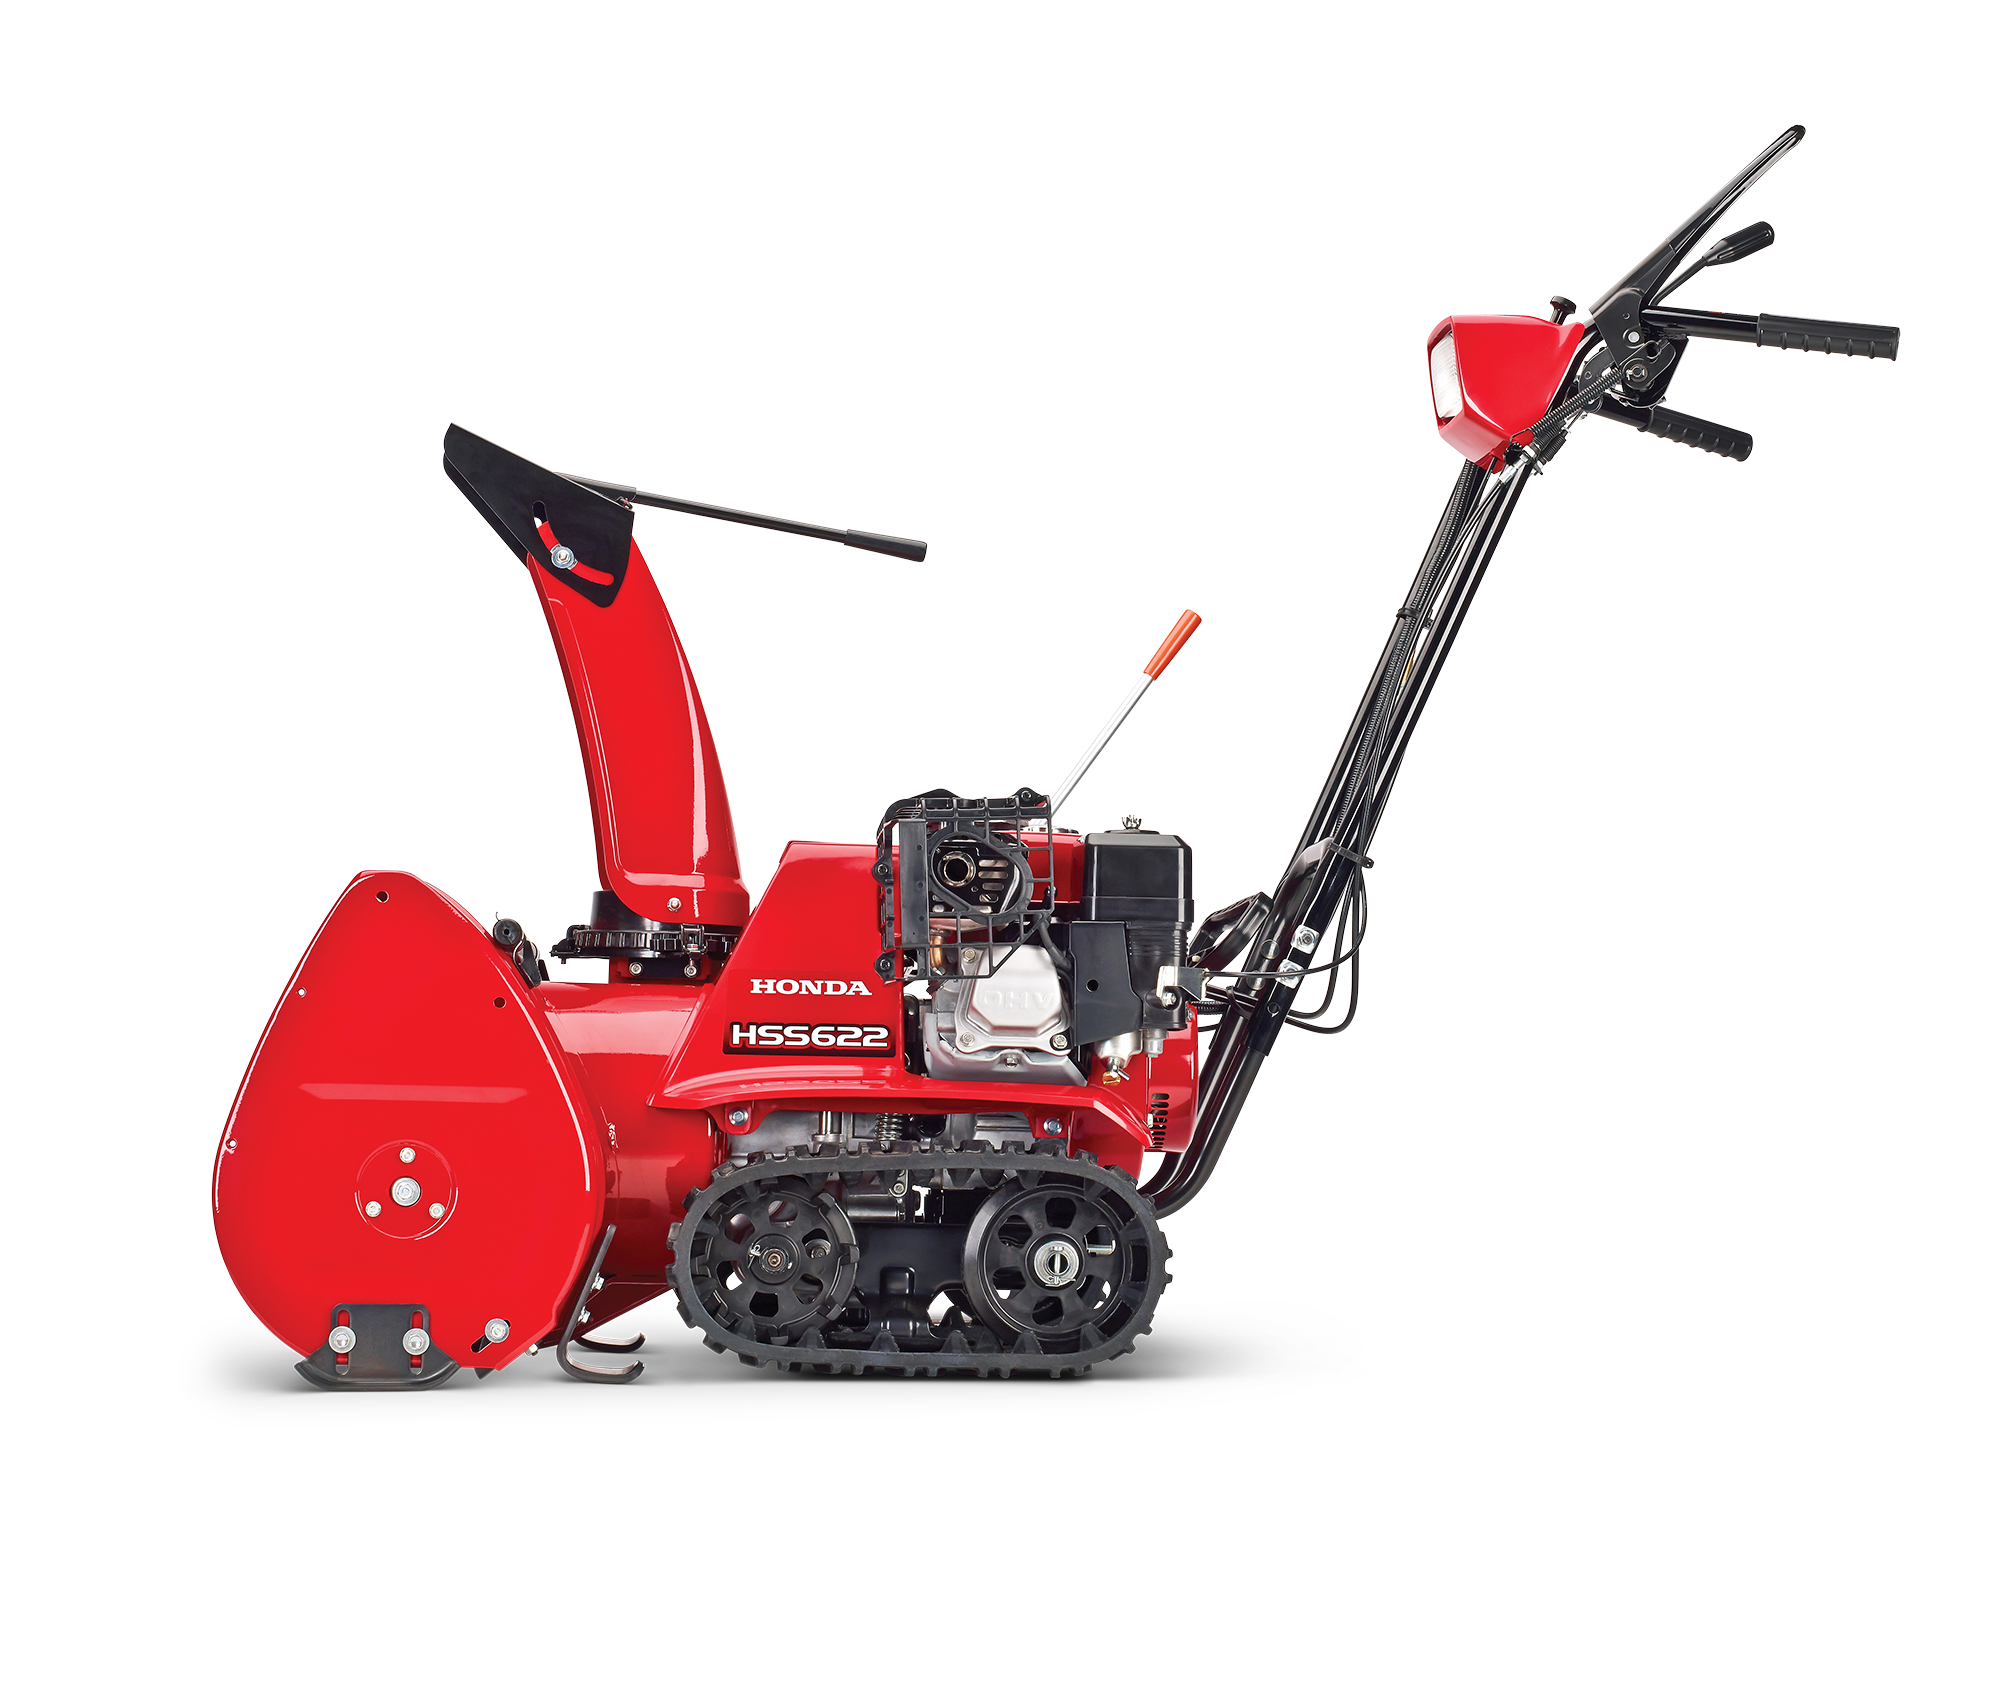 Image of the 22" Track-Drive ES Snowblower